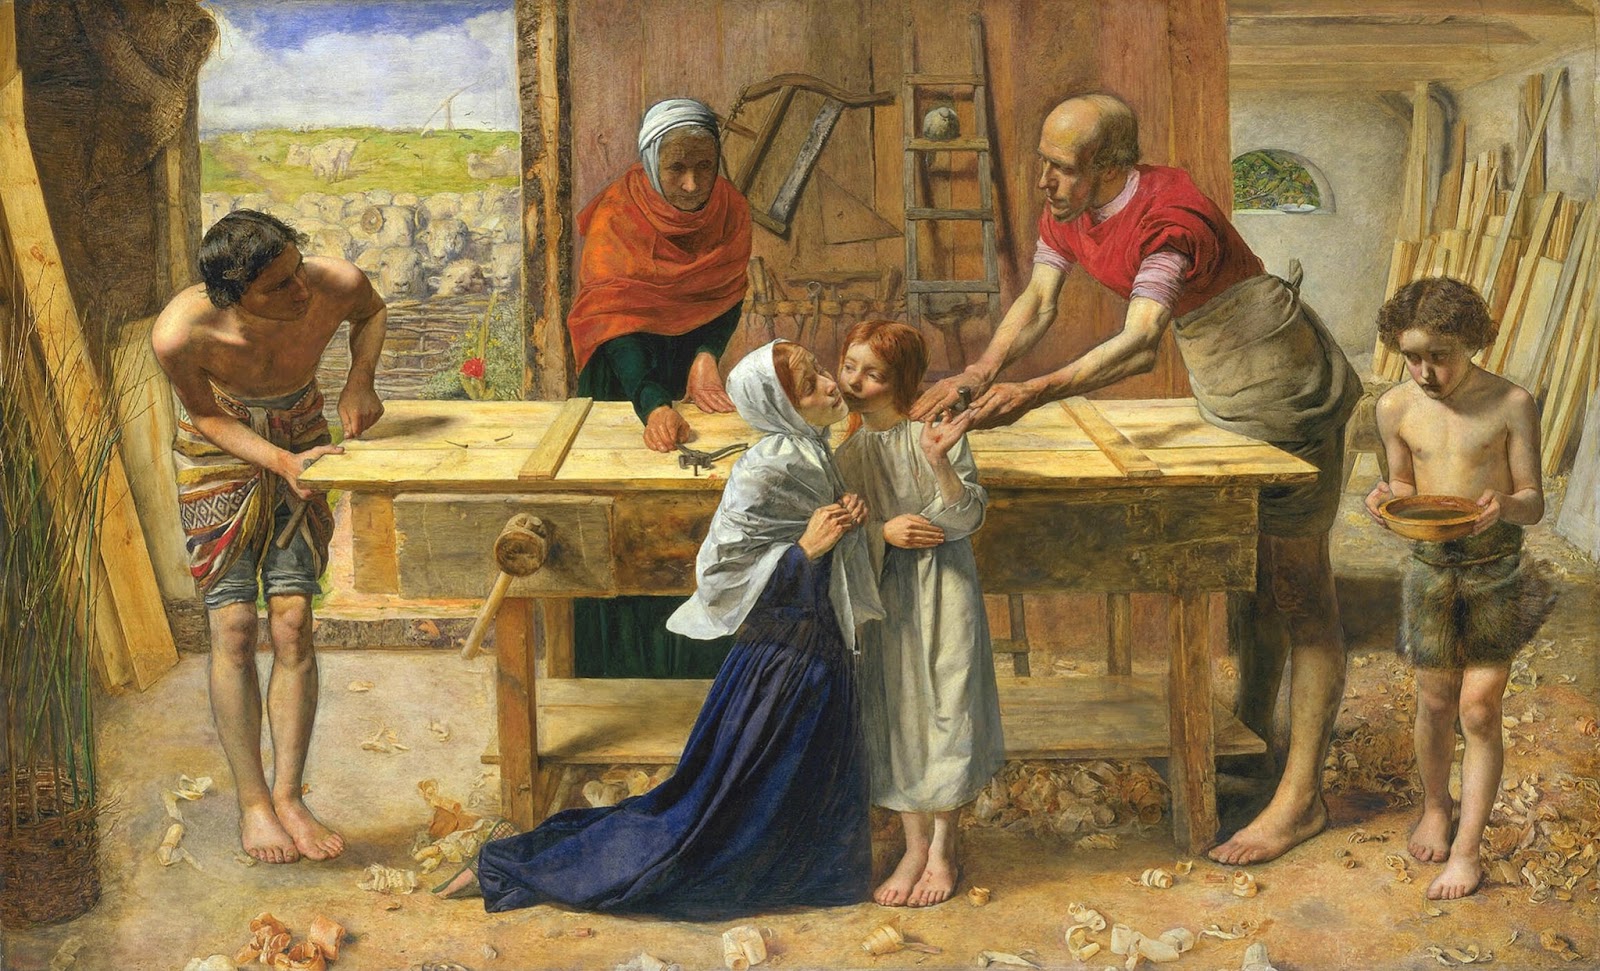 Christ in the House of His Parents depicts Jesus and John the Baptist Joseph’s workshop